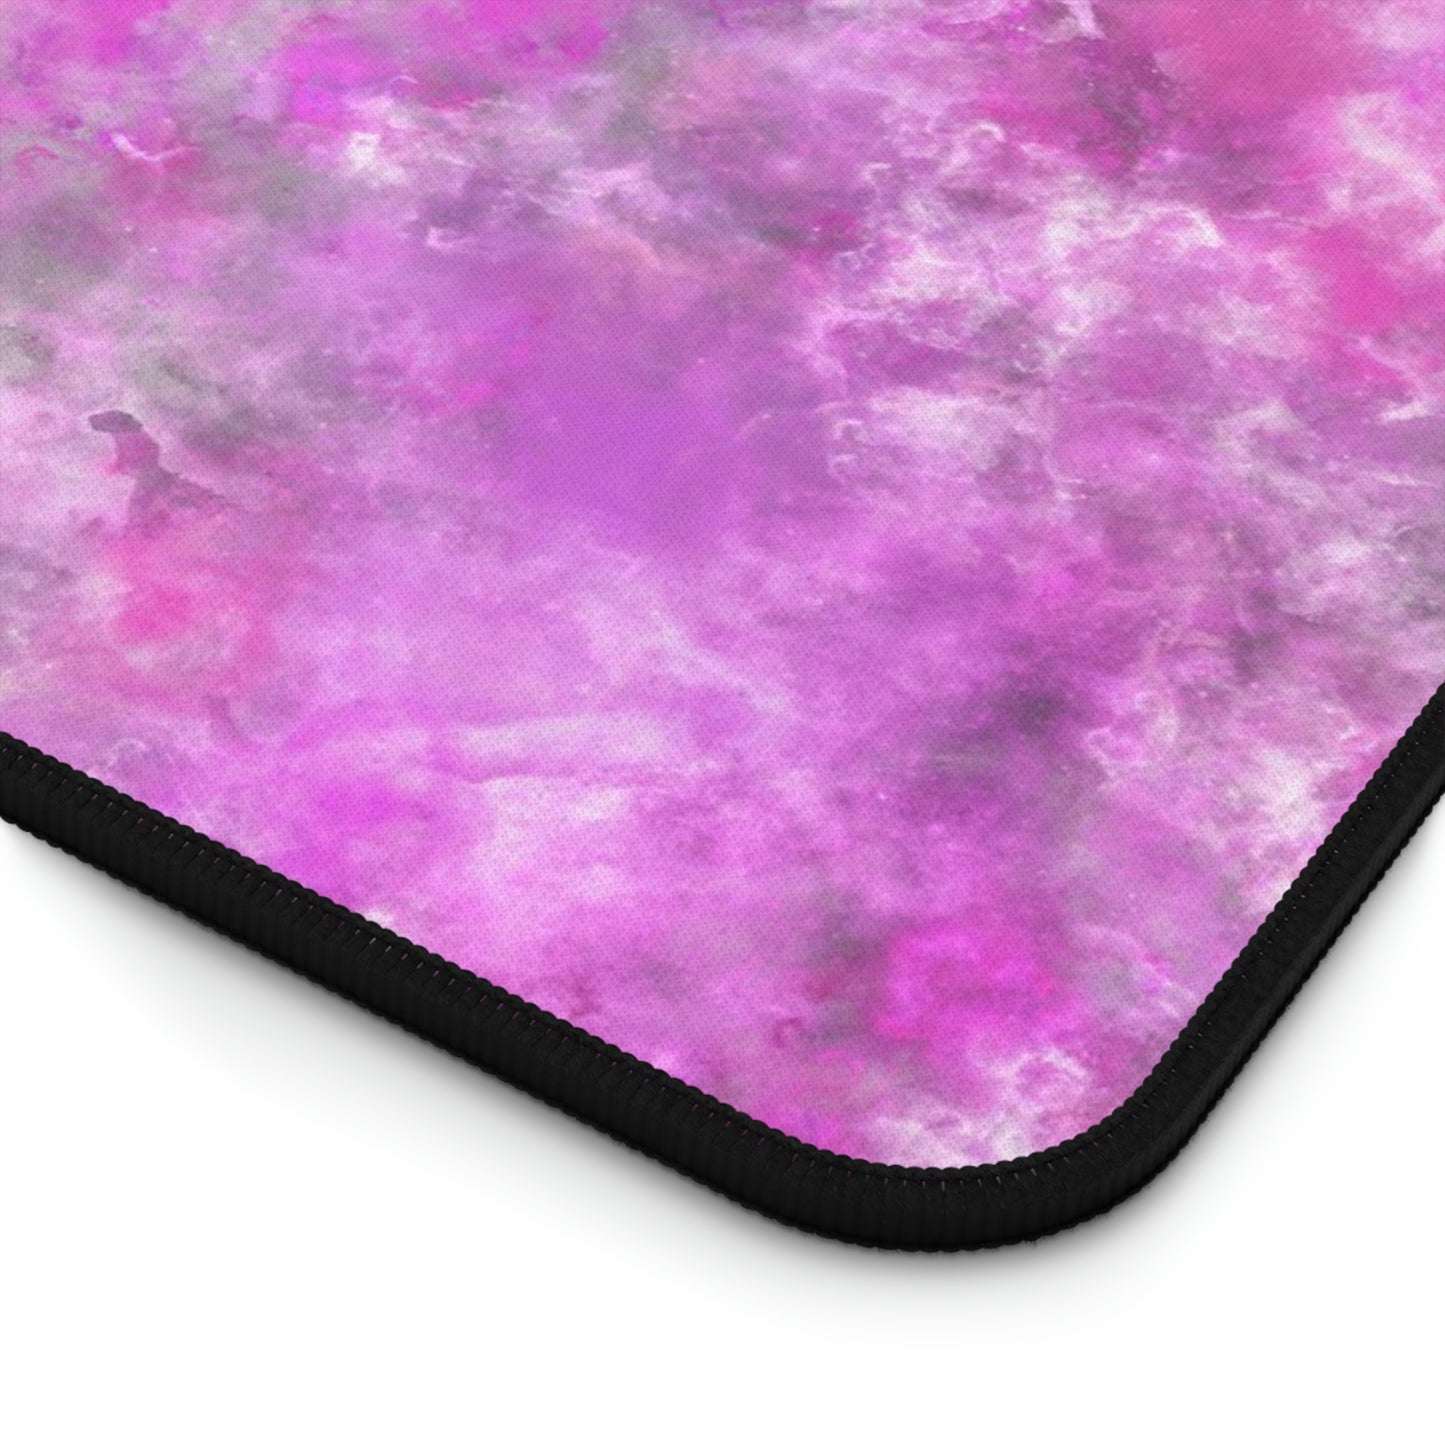 The corner of a 12" x 18" desk mat with a fluffy mix of pink, white, and gray.